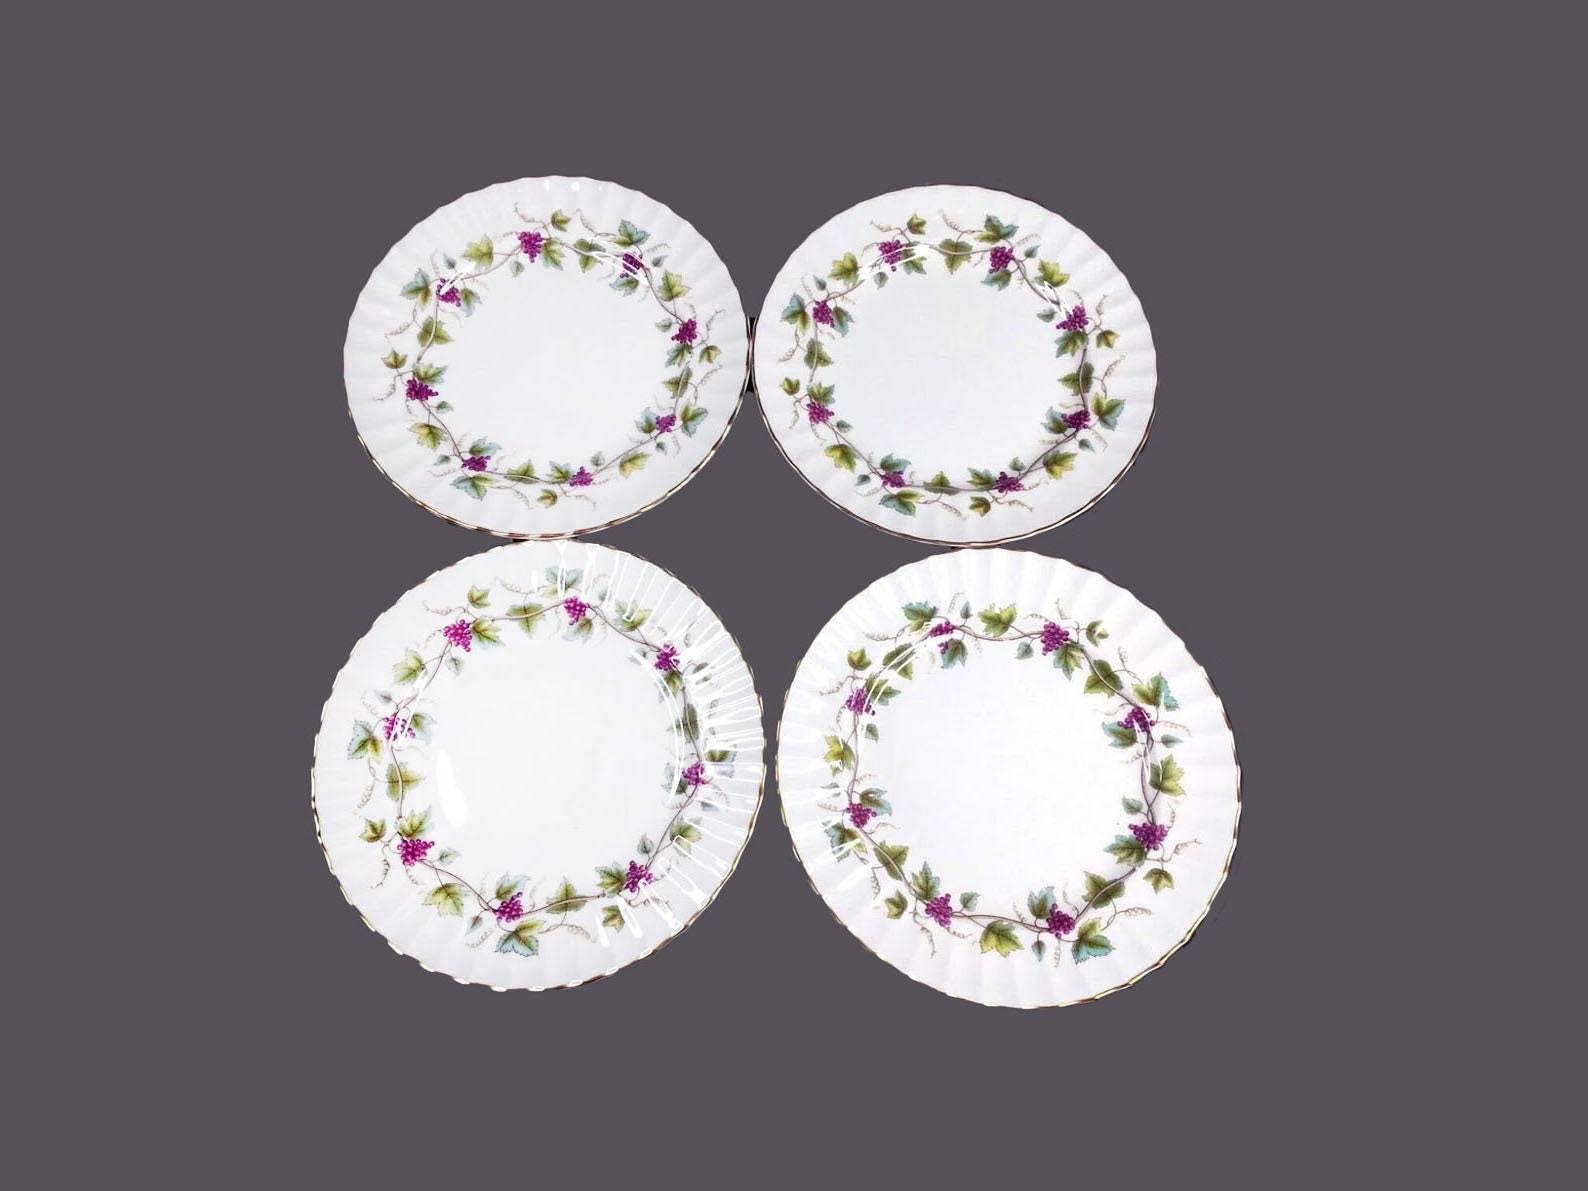 Royal Worcester Bacchanal White salad plates. Bone china made in England. - £42.80 GBP - £56.52 GBP